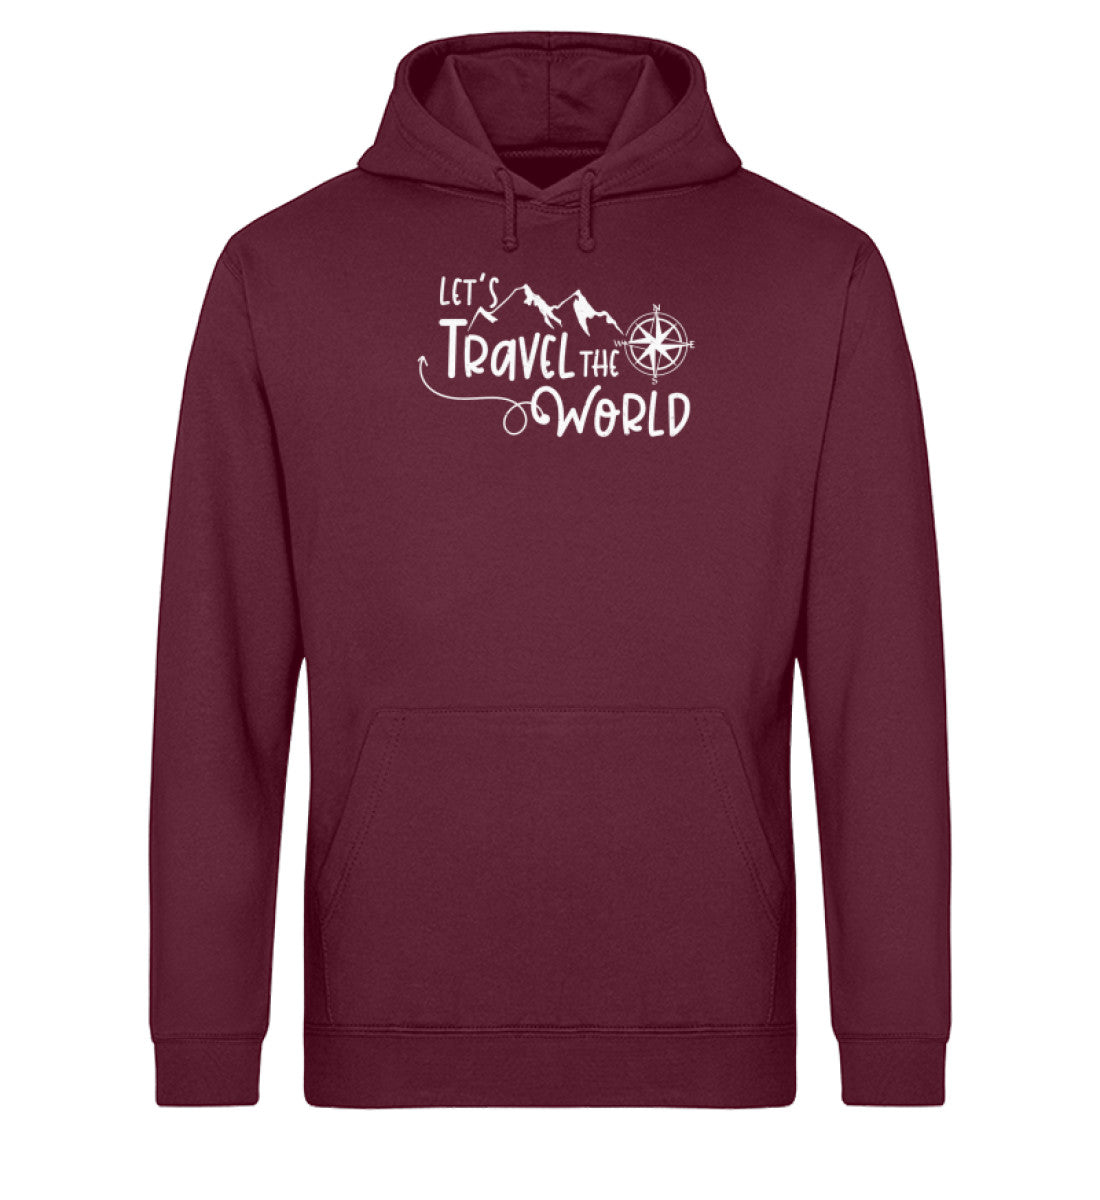 Lets travel the world - Unisex Organic Hoodie camping wandern Weinrot